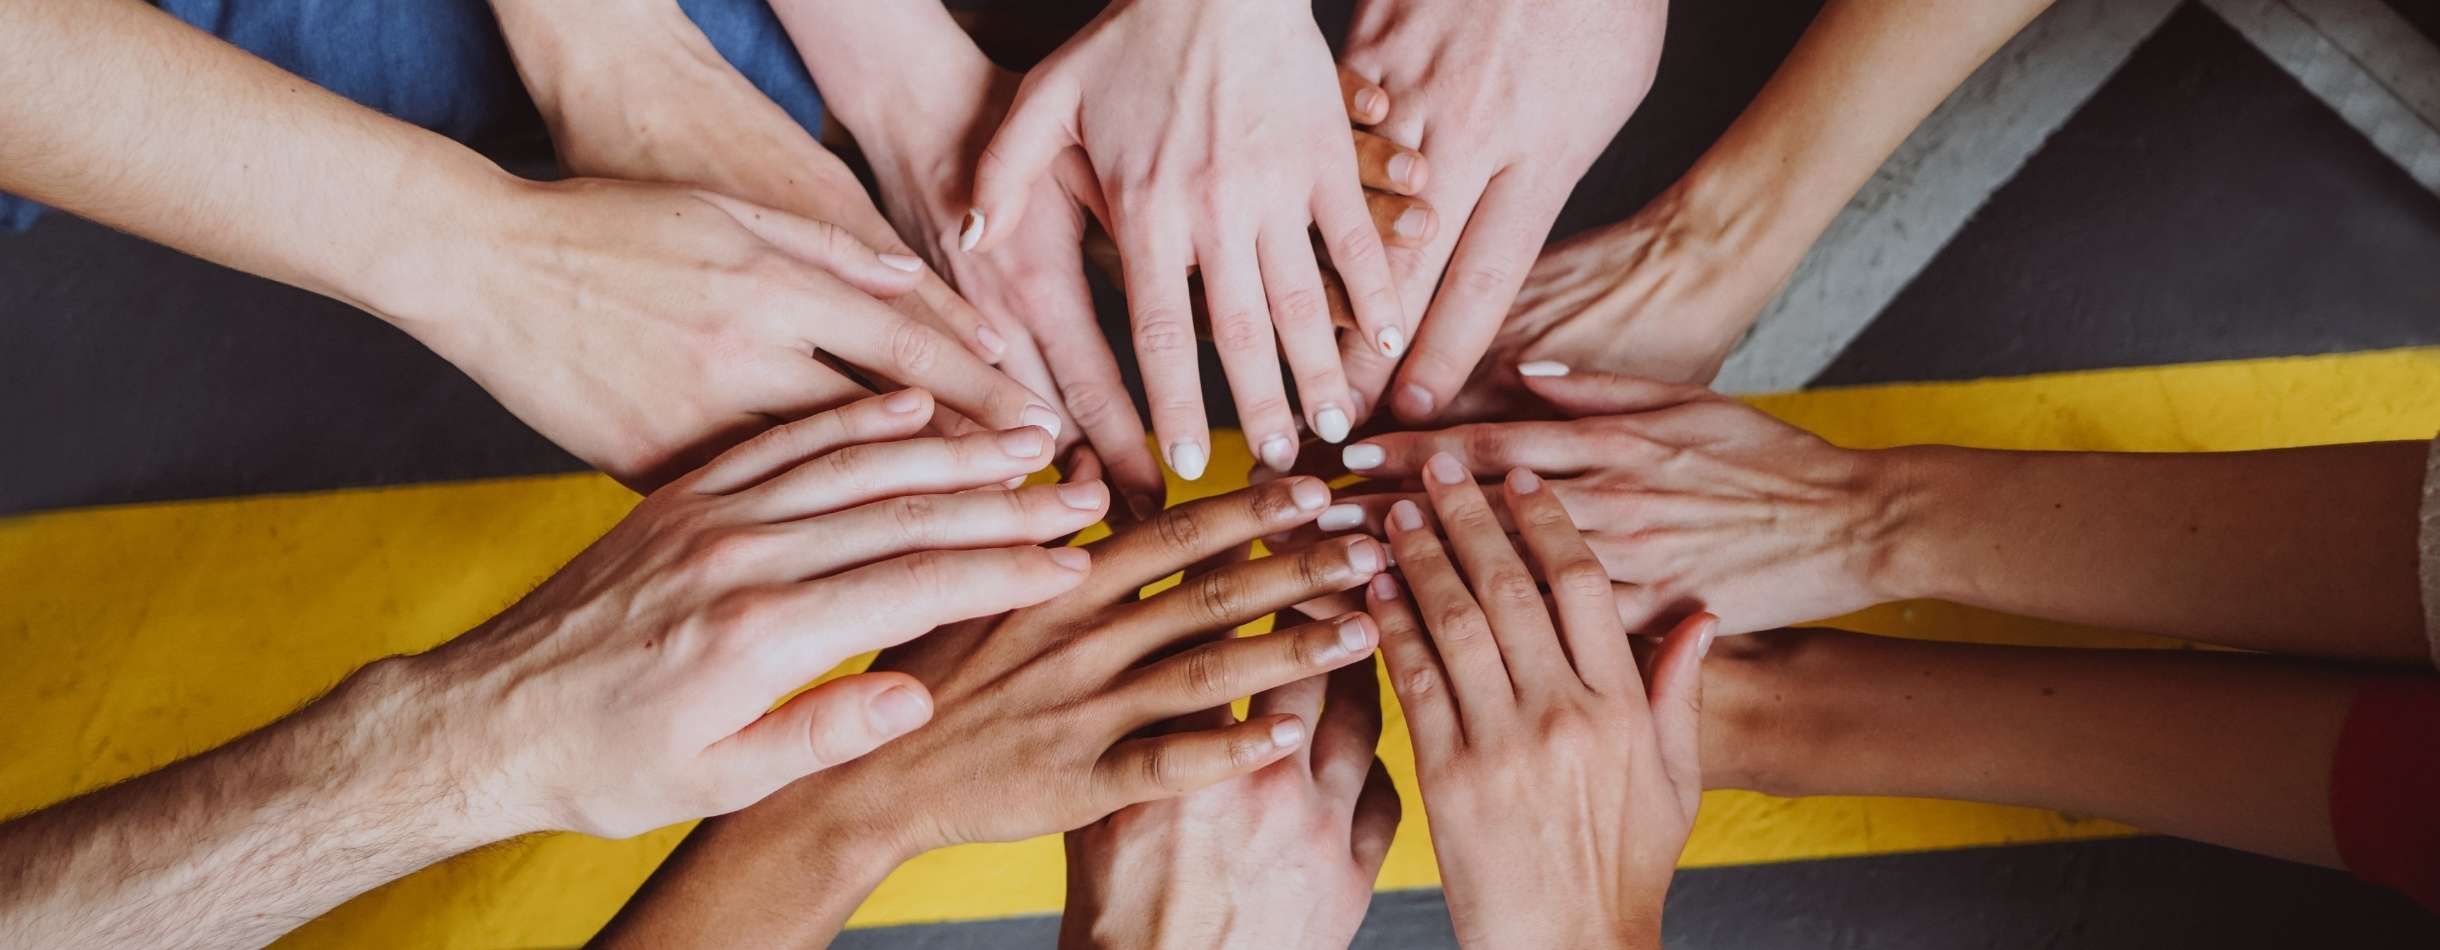 Several people place their hands on top of one another in a circle showcasing their camaraderie and strong team values.